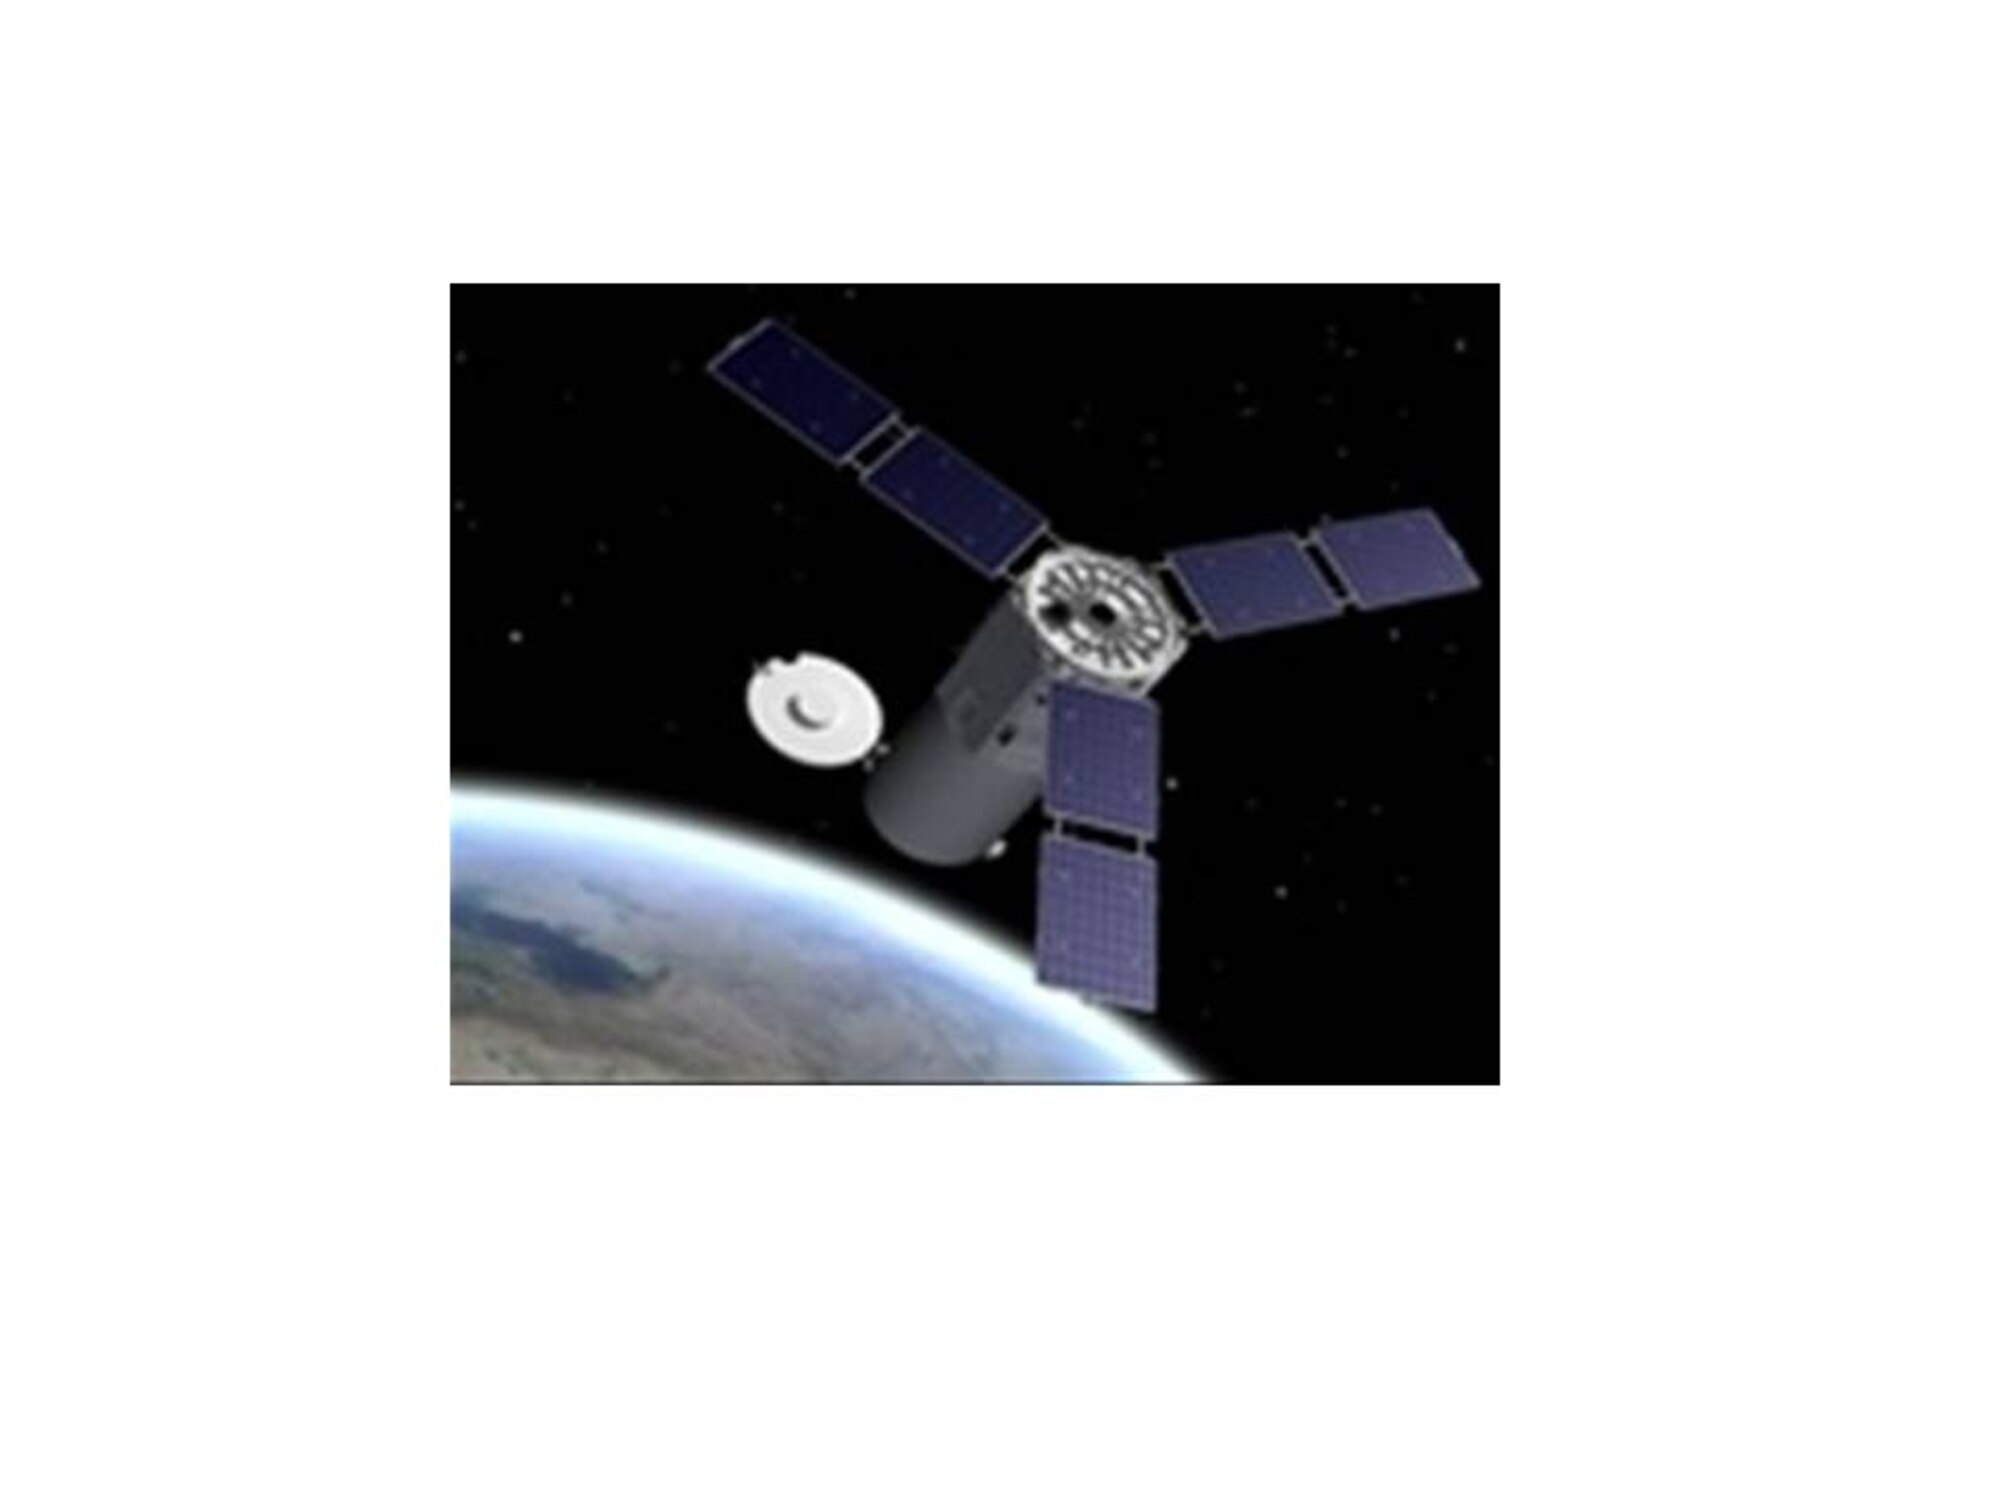 KIRTLAND AFB, N.M. -- The Operationally Responsive Space-1 satellite was transferred to operational use Jan. 3. The spacecraft provides enhanced imagery and data to the warfighter. (Graphic courtesy of the Operationally Responsive Space office)